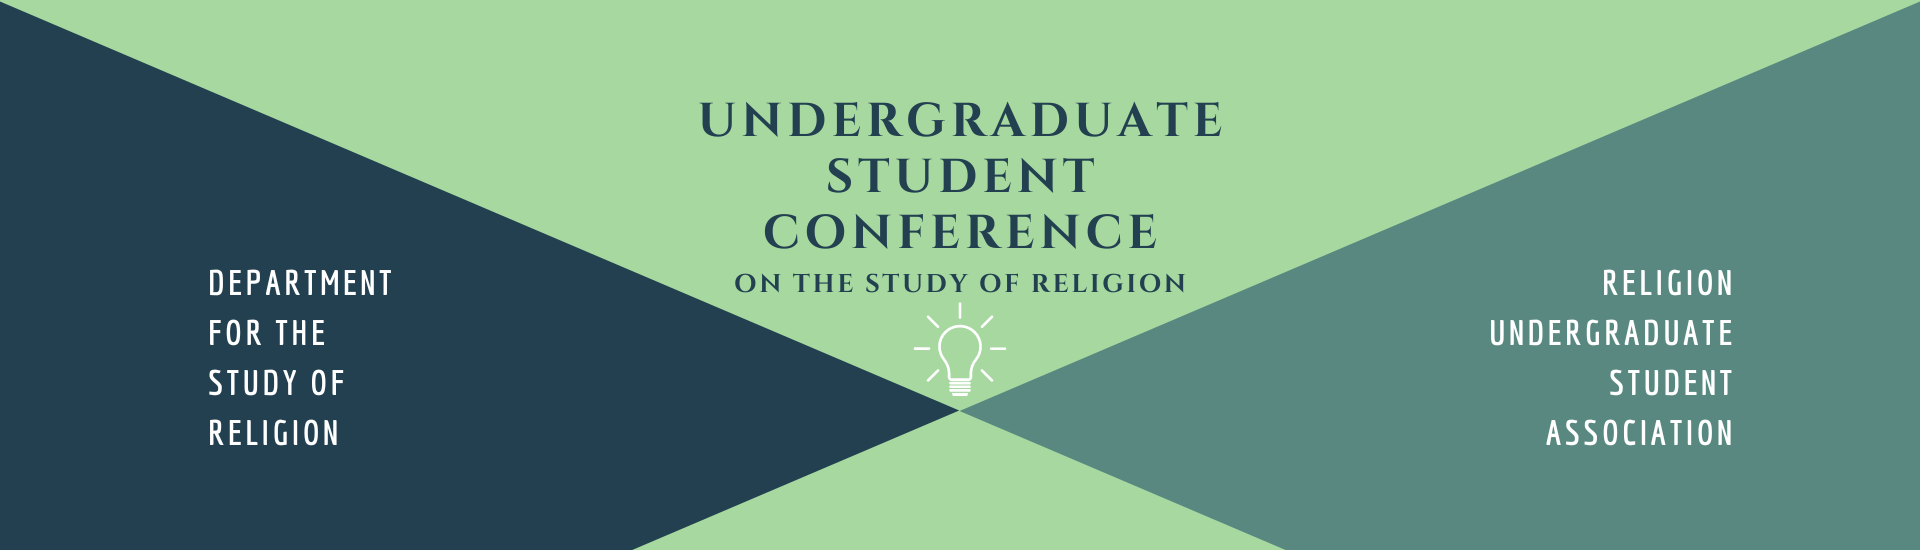 Undergraduate Student Conference on the Study of Religion